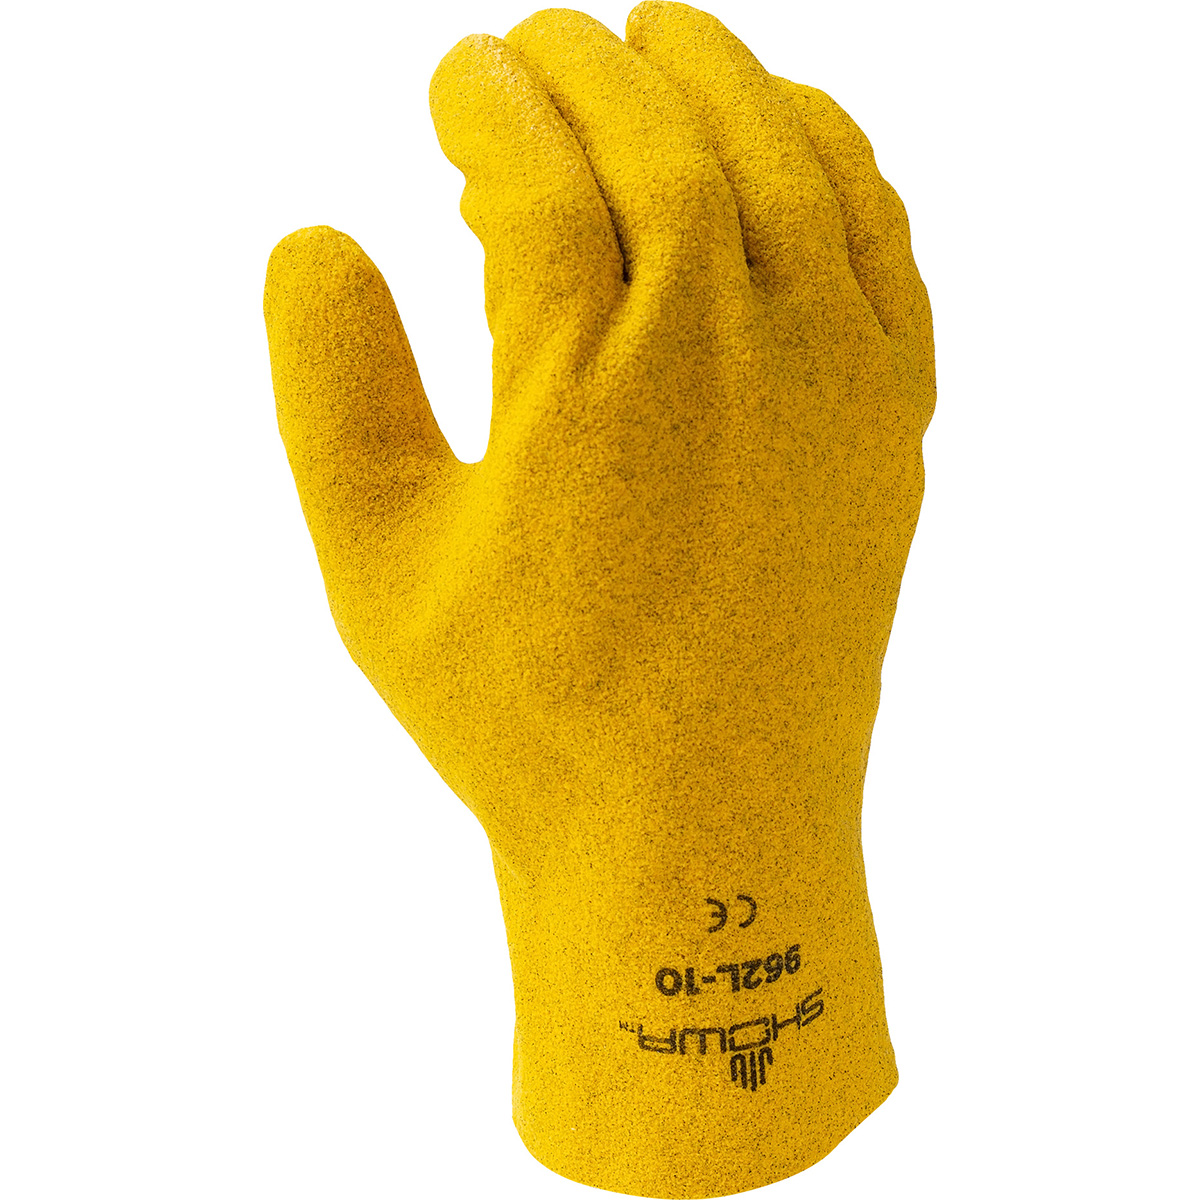 General purpose PVC fully coated, yellow, jersey liner, slip-on, extra large